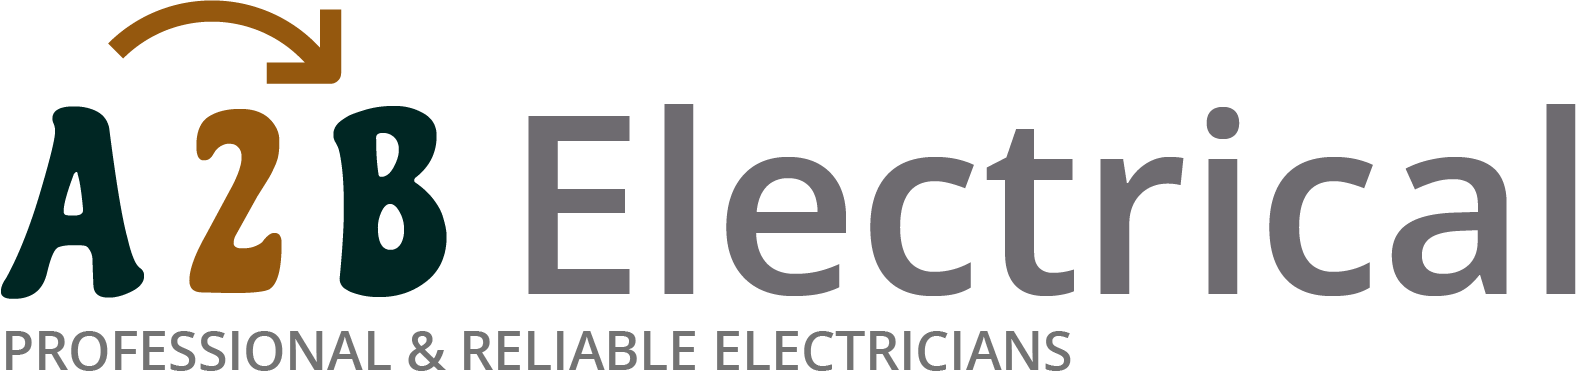 If you have electrical wiring problems in Litherland, we can provide an electrician to have a look for you. 